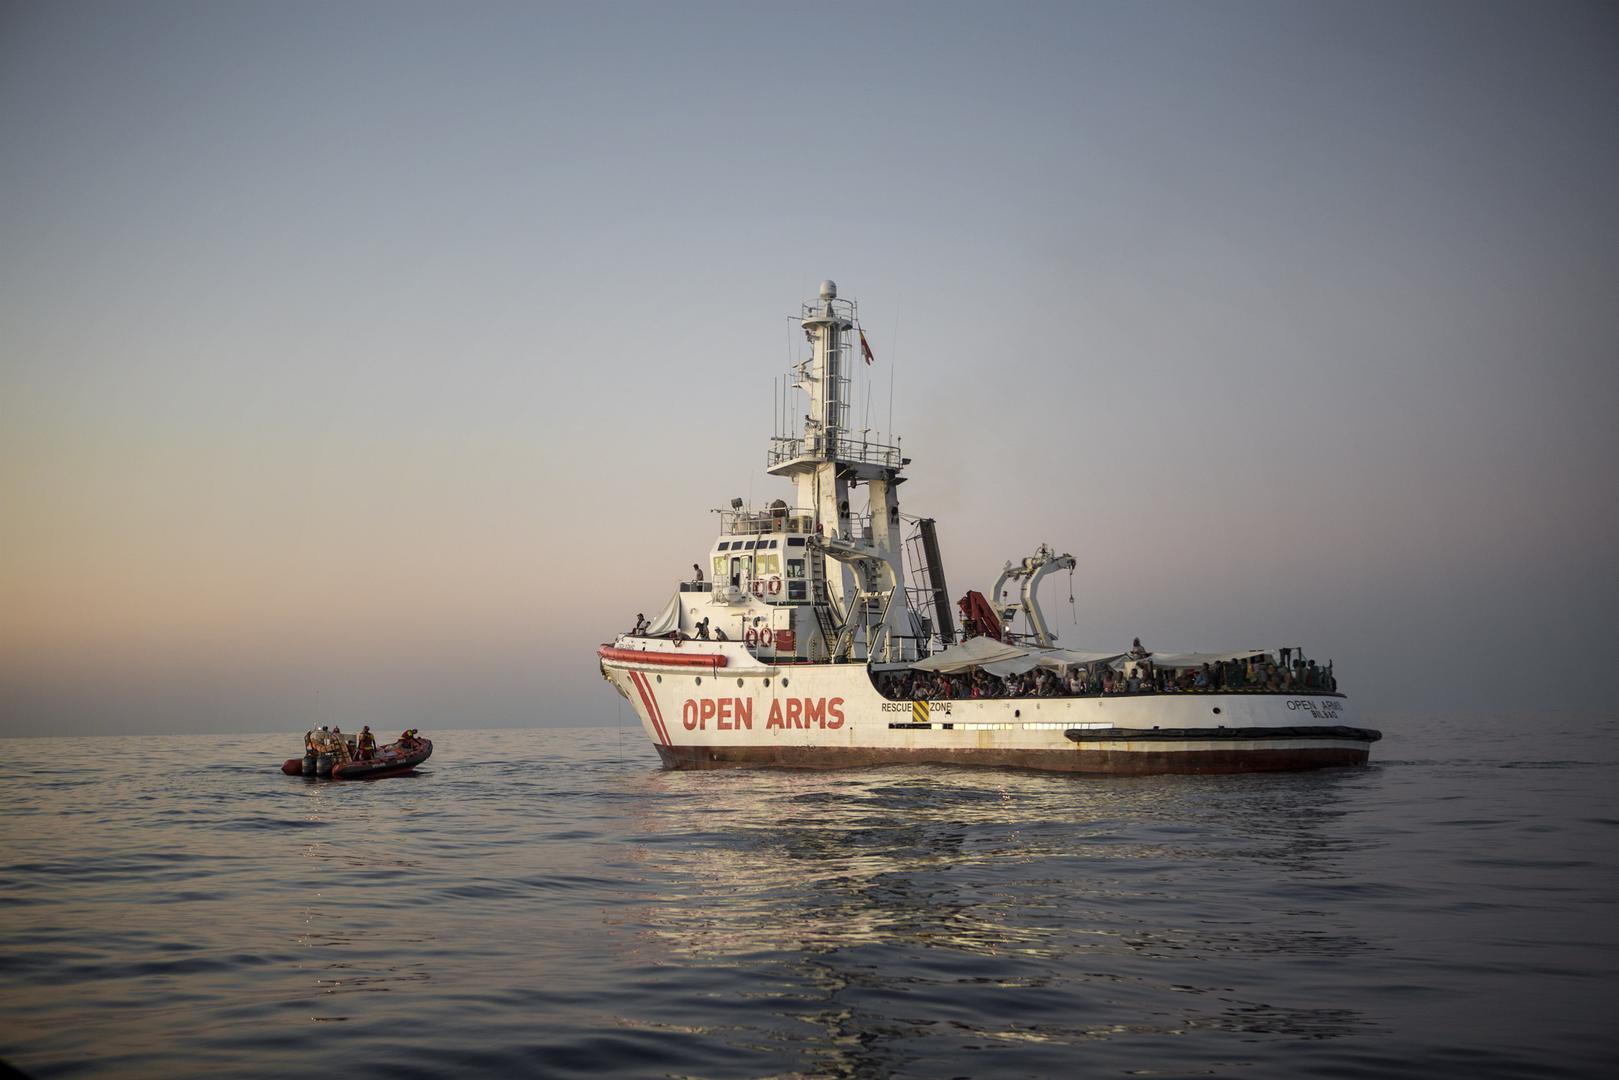 Proactiva’s rescue ship Open Arms on mission in November 2017. 